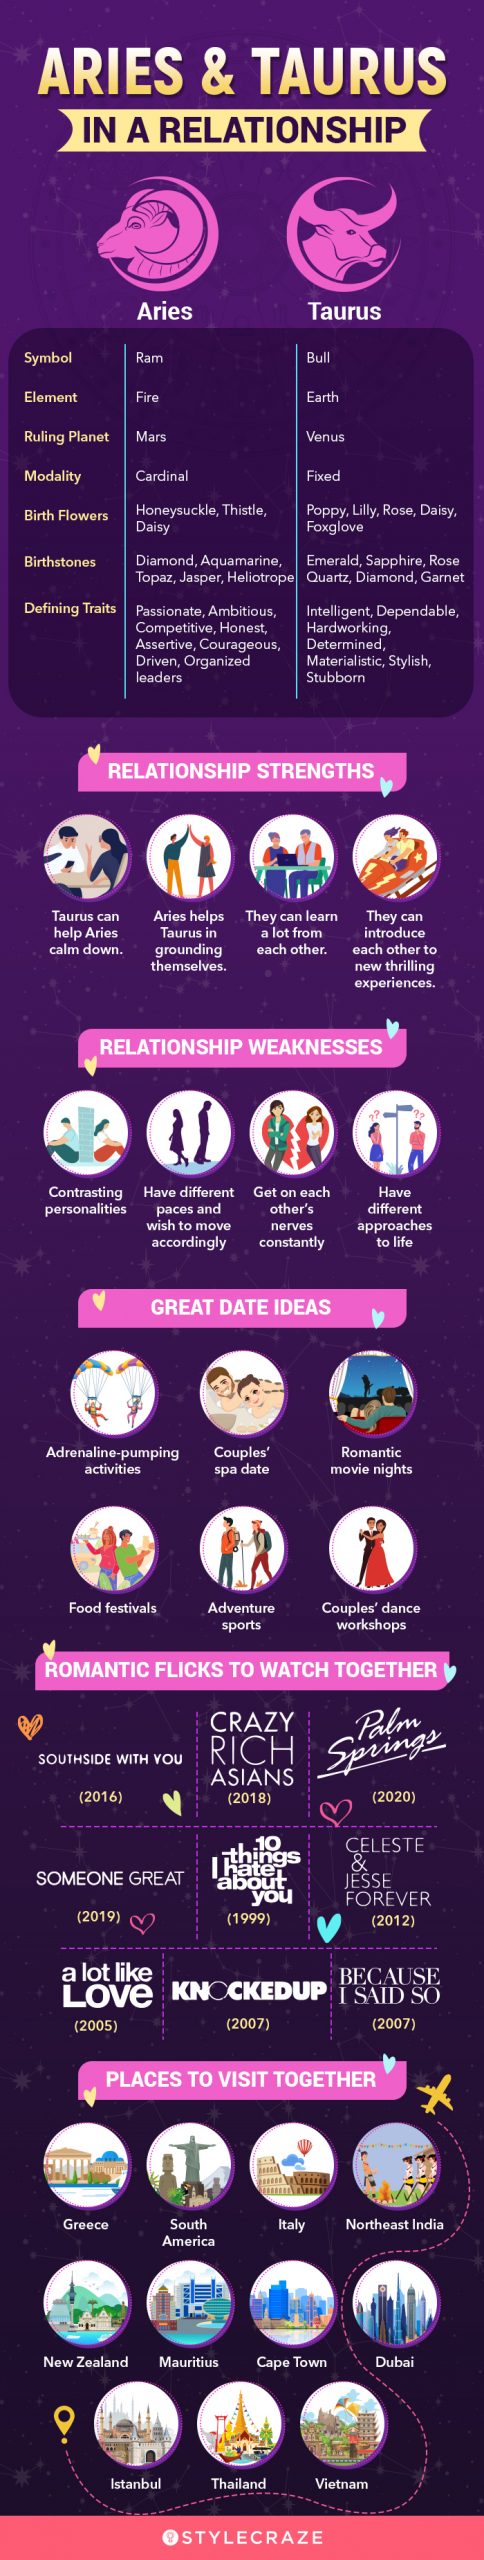 aries and taurus in a relationship [infographic]